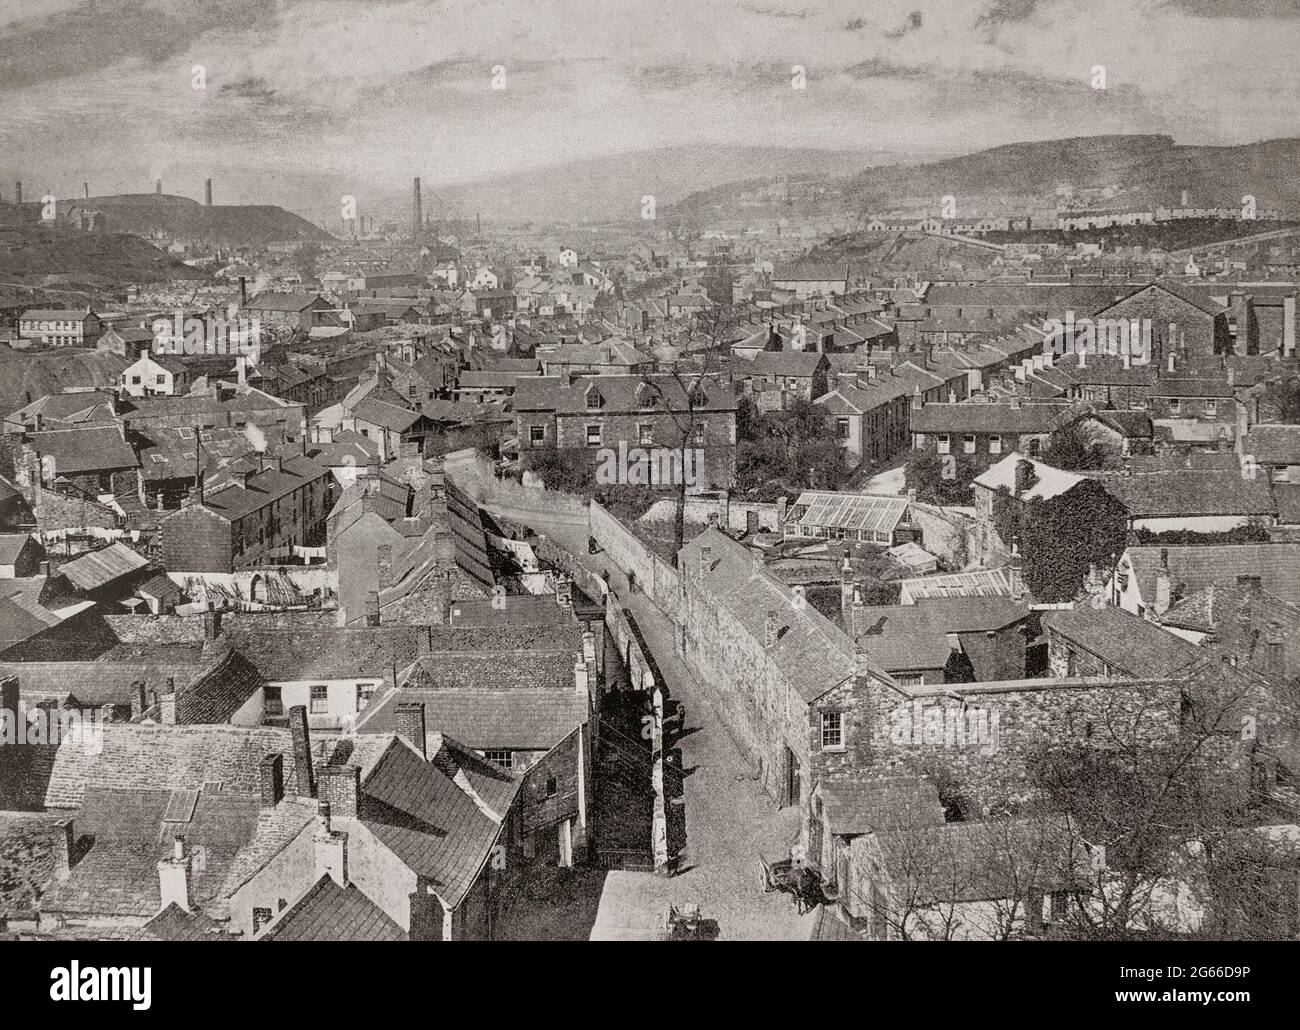 A late 19th century aerial view of Merthyr Tydfil in Glamorganshire, South Wales. Close to reserves of iron ore, coal, limestone, timber and water, it was an ideal site for ironworks and in the wake of the Industrial Revolution the demand for iron led to the rapid expansion of Merthyr's iron operations housing four of the greatest ironworks in the world: Dowlais Ironworks, Plymouth Ironworks, Cyfarthfa Ironworks and Penydarren. Stock Photo